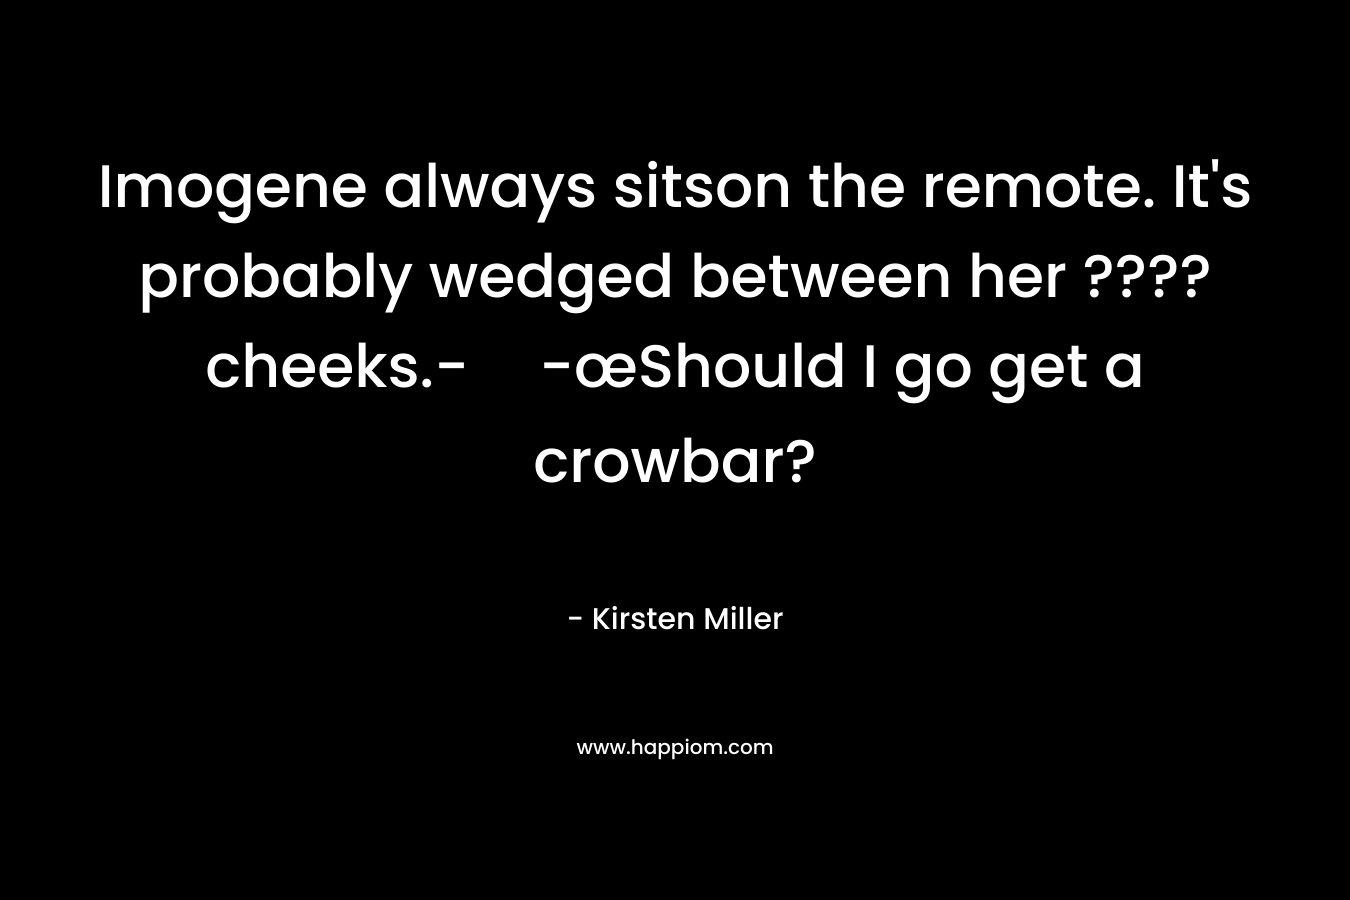 Imogene always sitson the remote. It’s probably wedged between her ???? cheeks.--œShould I go get a crowbar? – Kirsten Miller